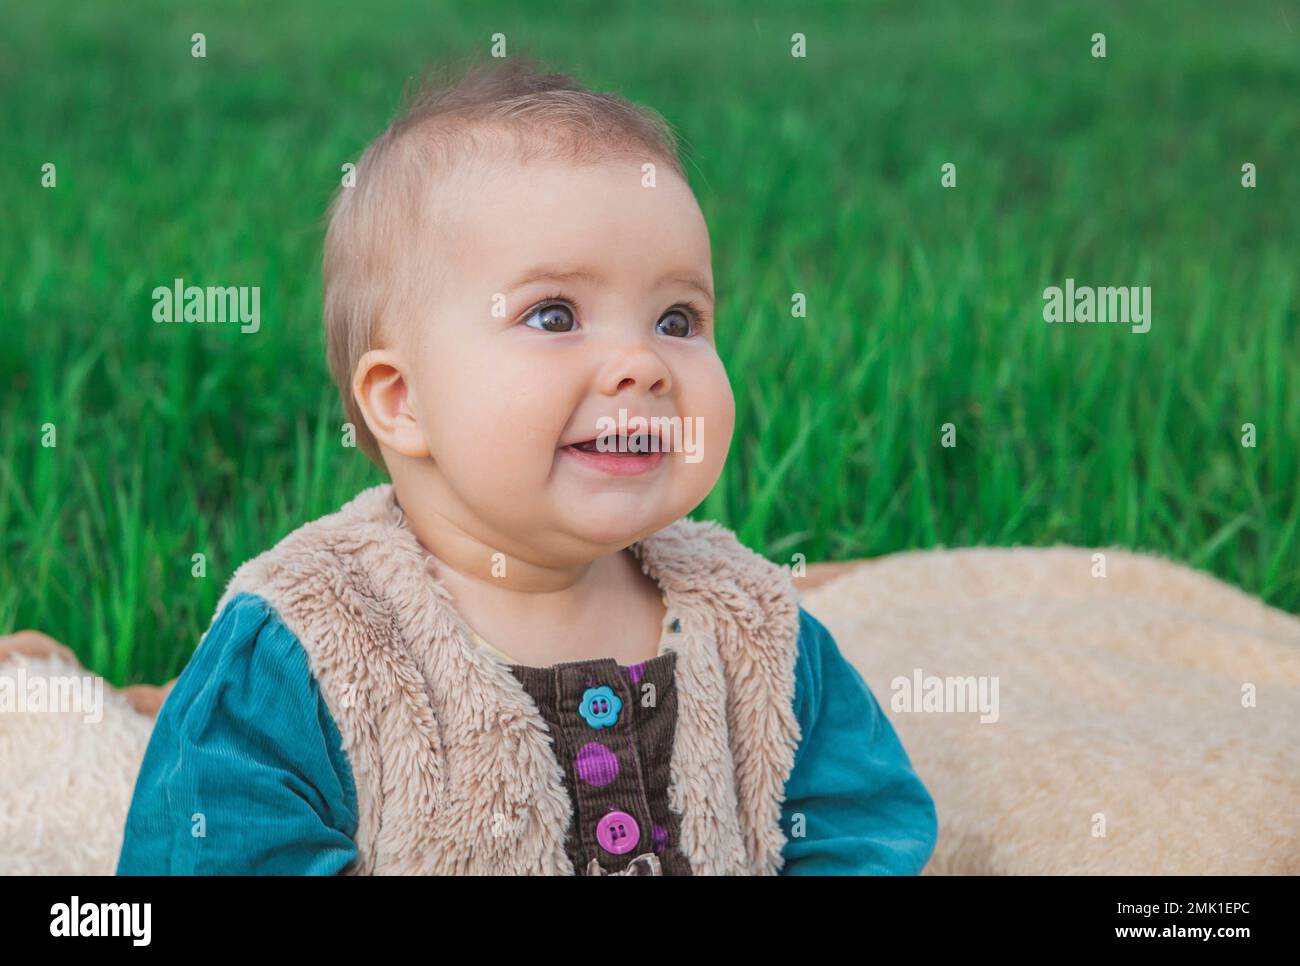 toothless baby in a multi-colored dress sitting on a bedspread on lawn Stock Photo